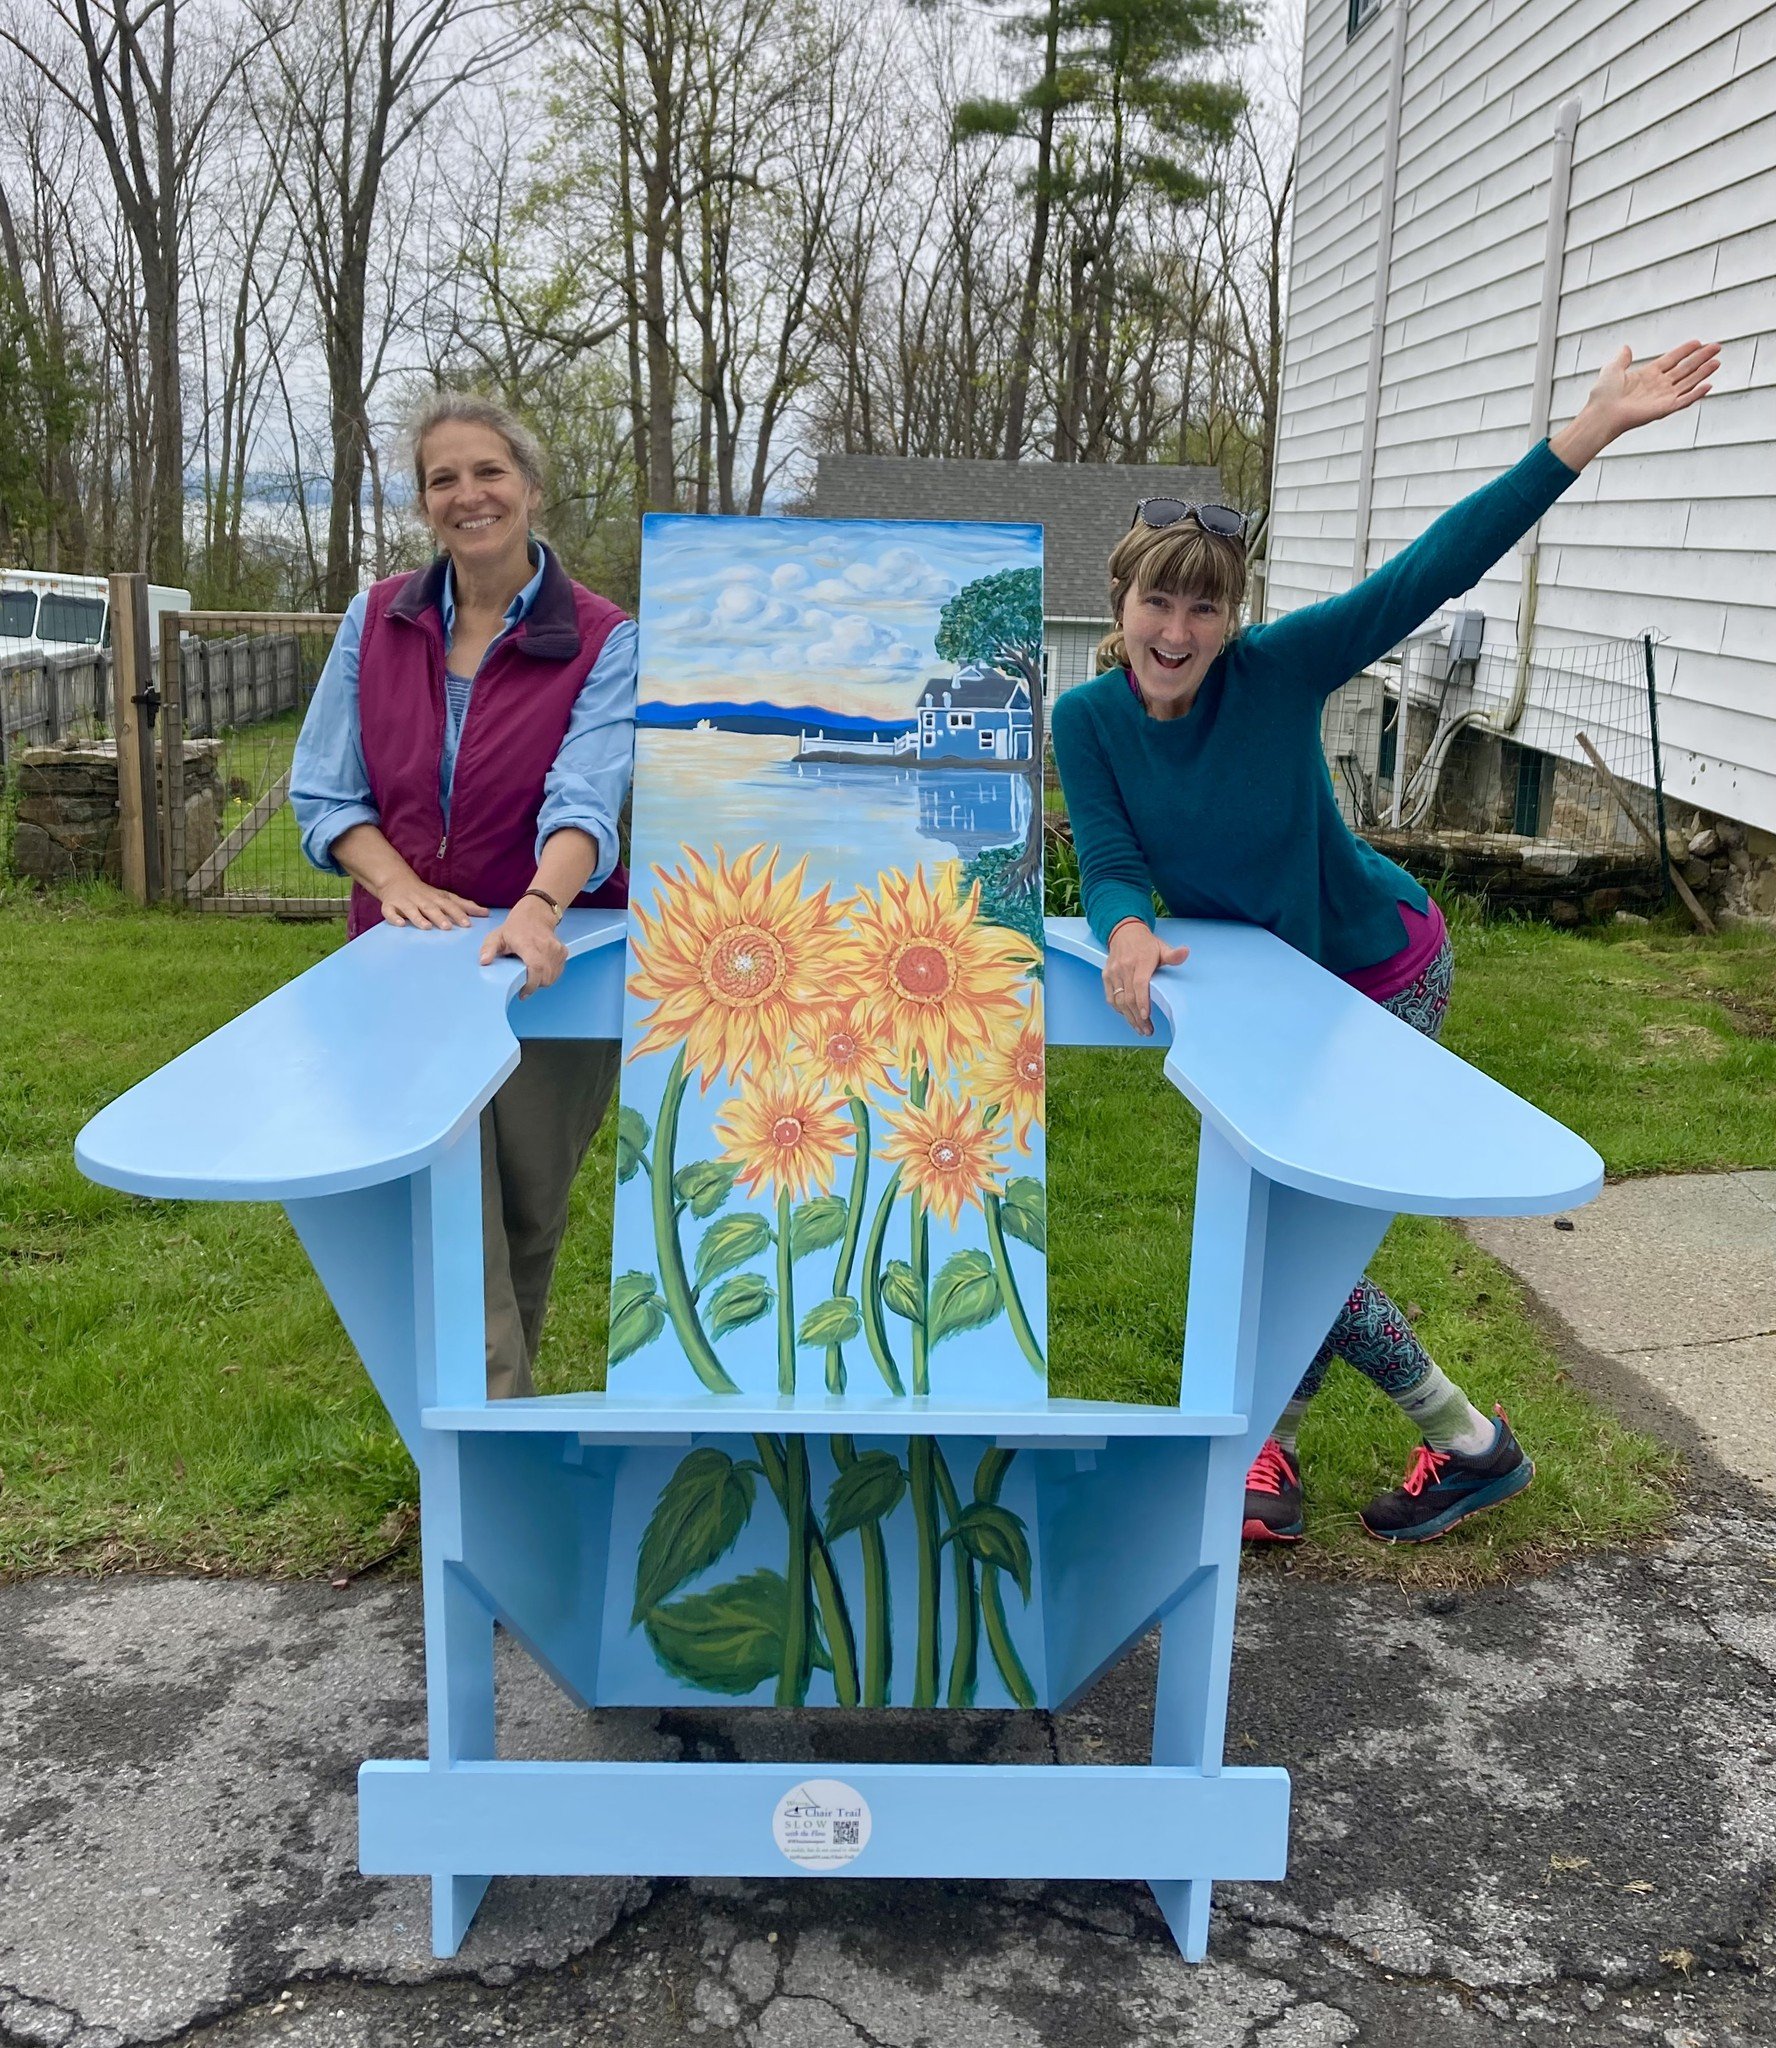 Another Chair has arrived at its home! Slow down and keep an eye out for this one at Hamilton Hall, 32 Champlain Ave, and Join the  Westport Chair Trail Opening Night &amp; Stroll on Friday, May 10 (Link in bio) to celebrate the Chair Trail and go &l